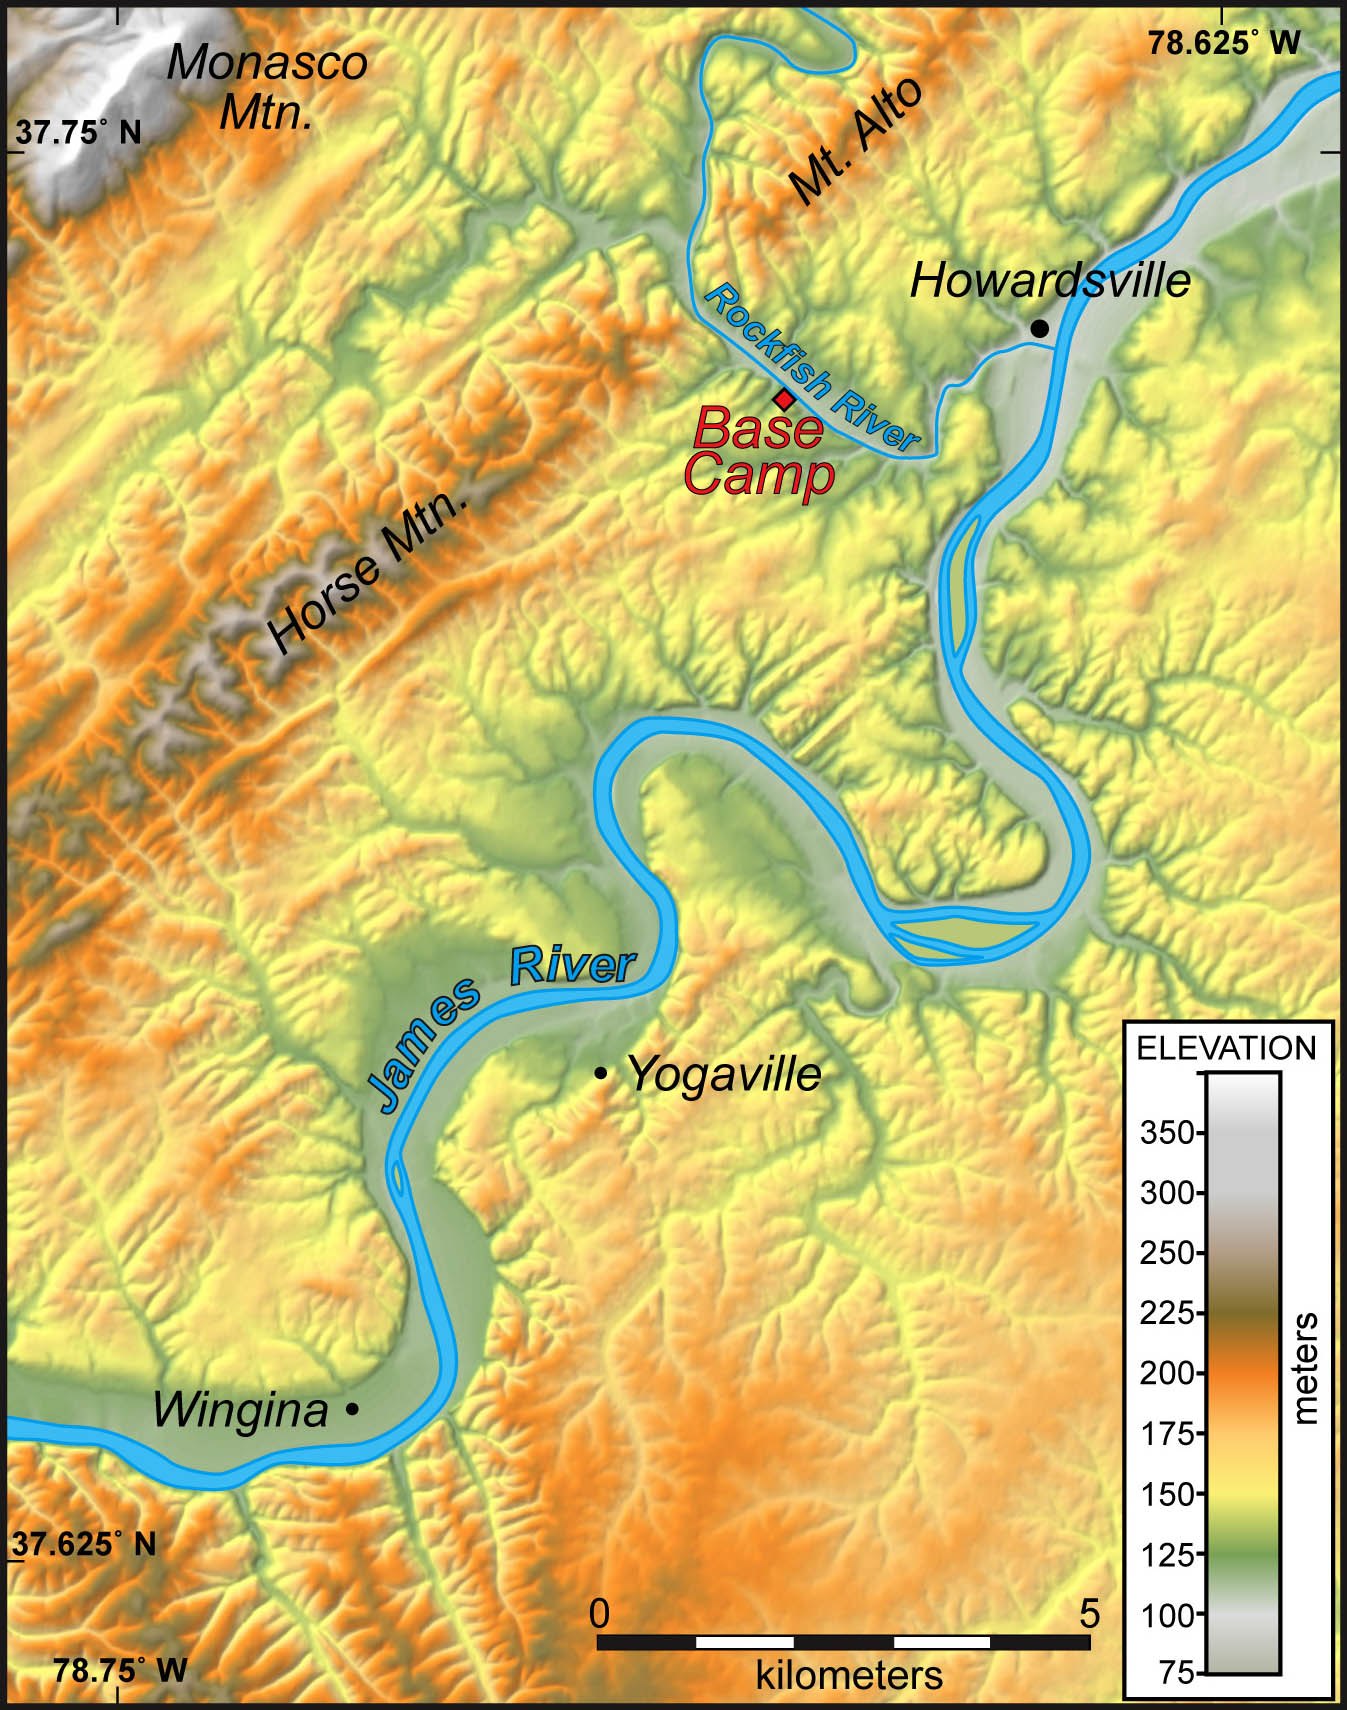 Shaded relief map of the study area near Howardsville, Virginia.  Note the linear elements in the topography to the northwest of the James River and the dendritic drainage to the southeast of the james River.